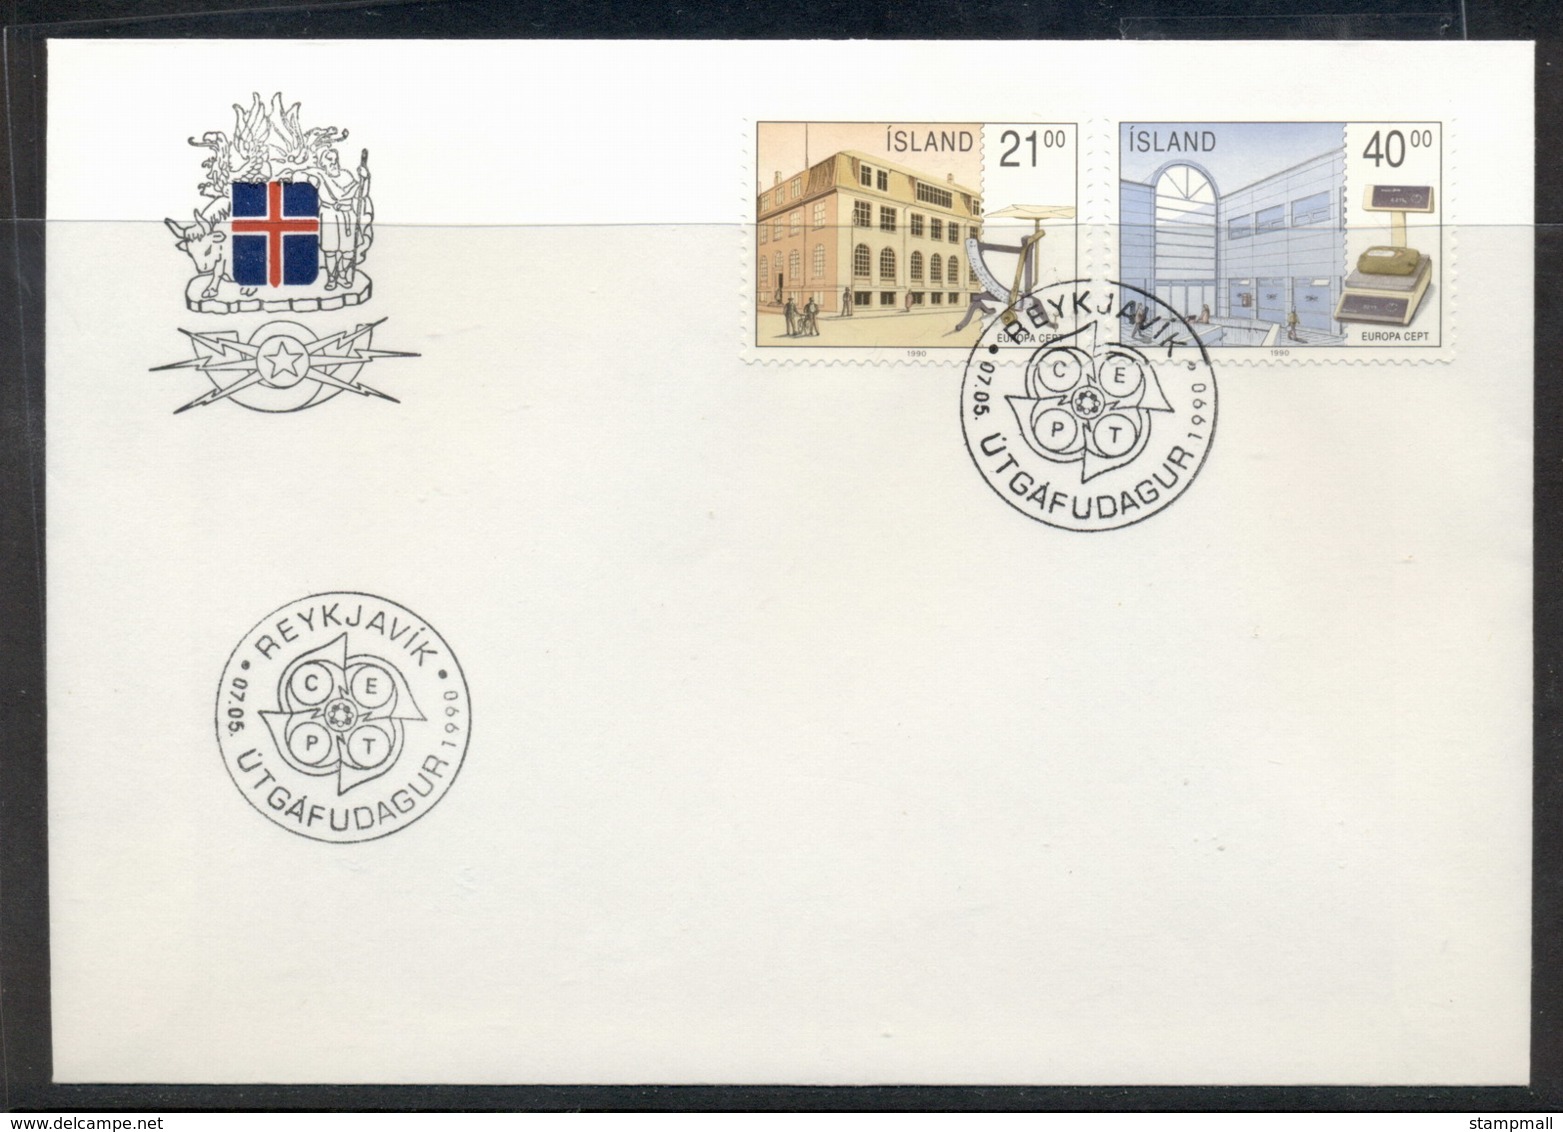 Iceland 1990 Europa Post Offices FDC - FDC